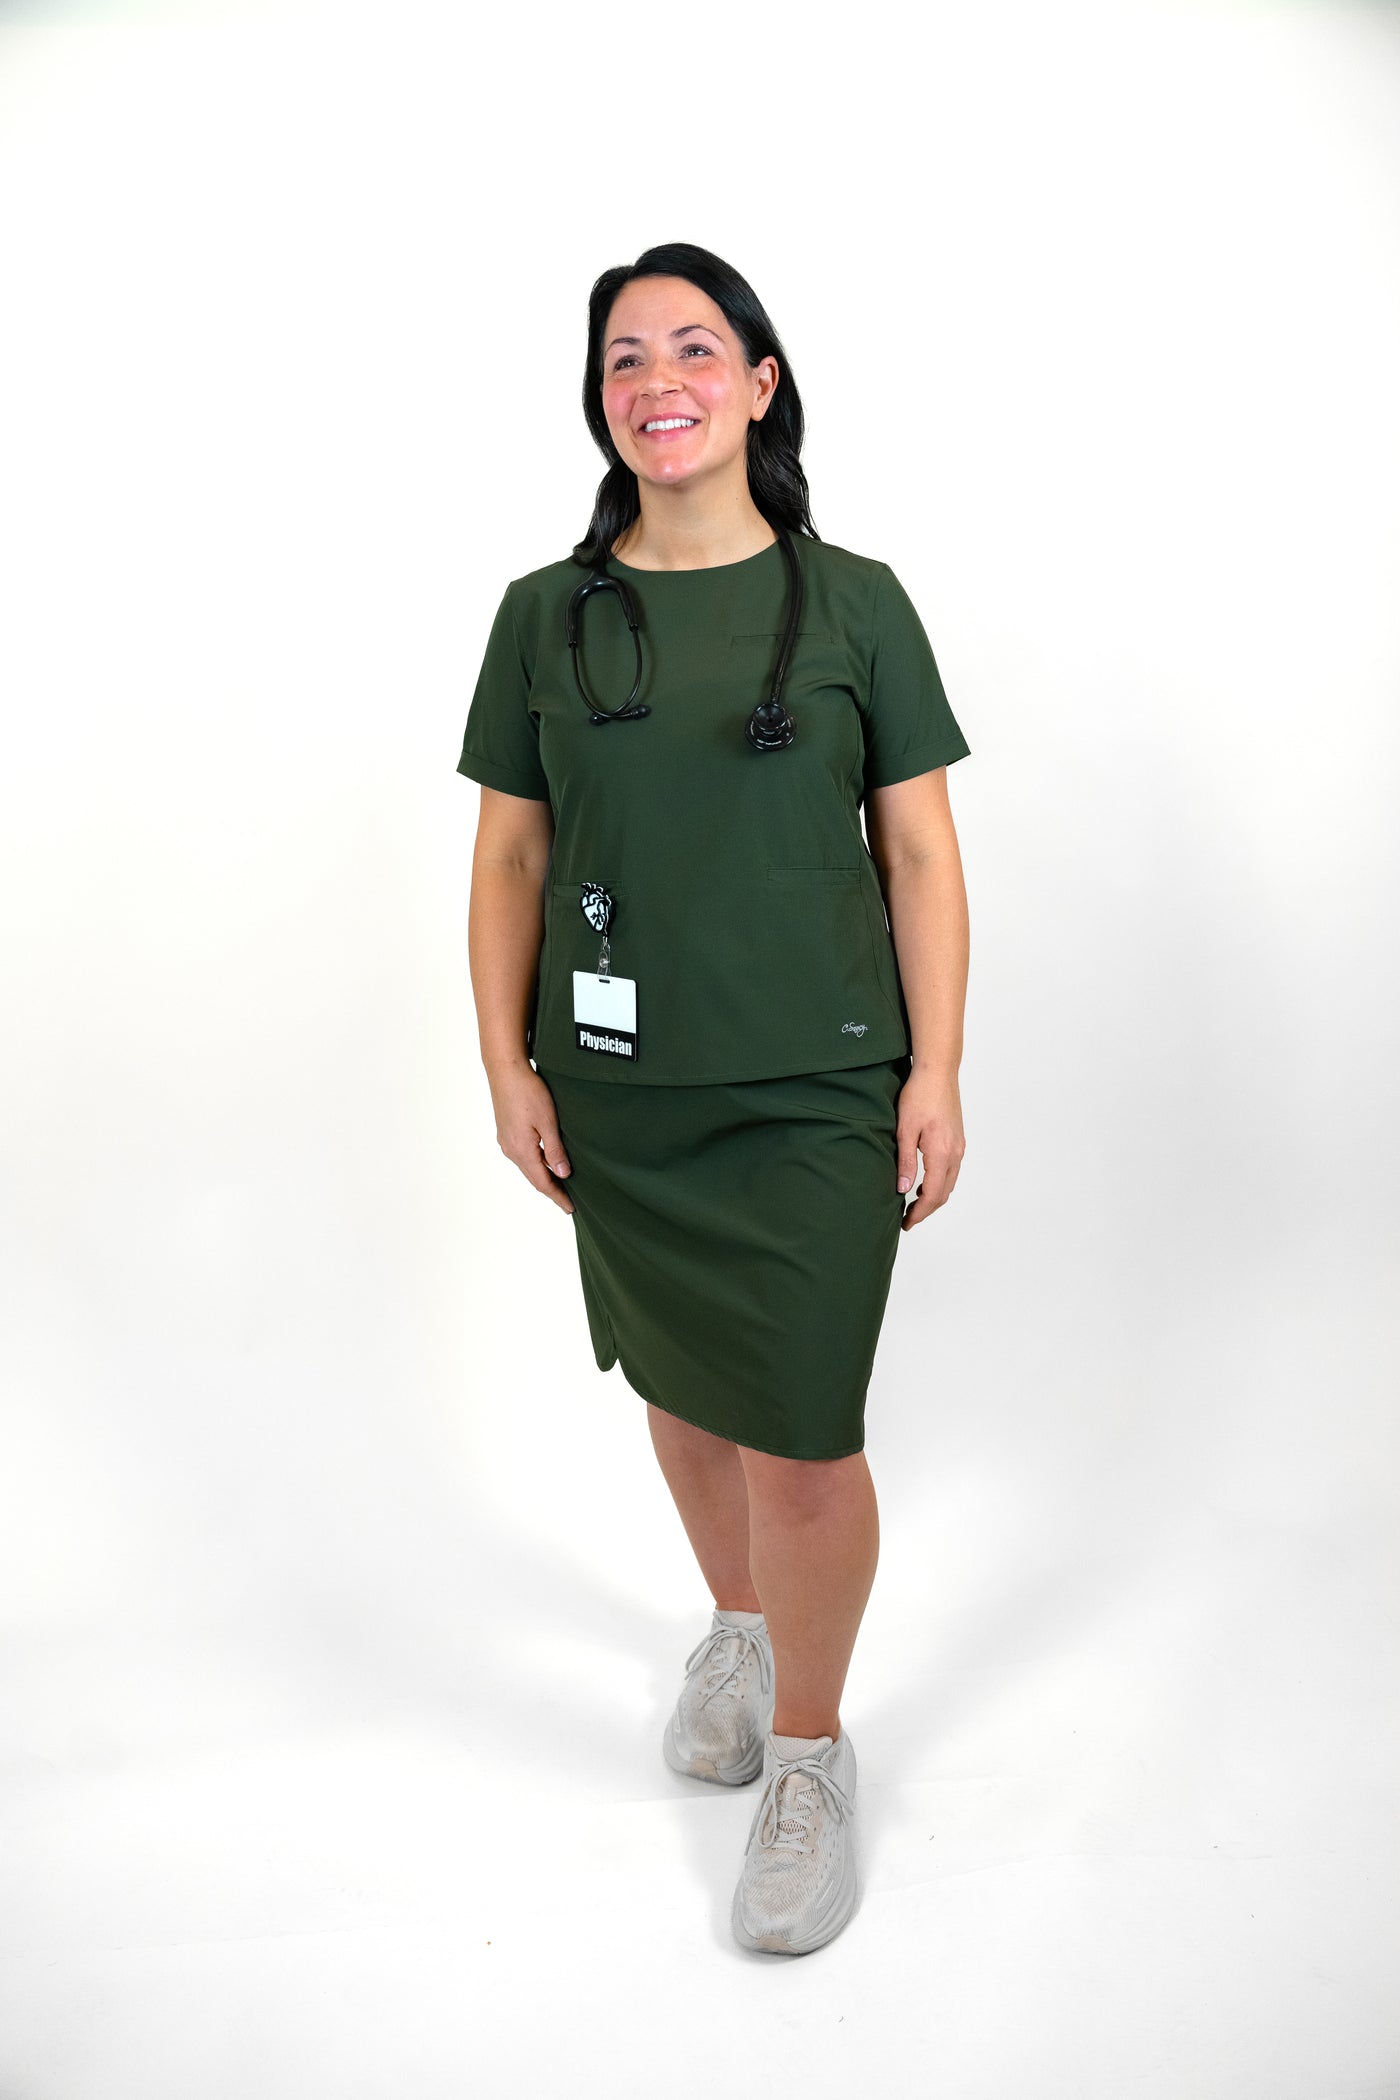 The Effortless Scrub Top- Olive Green